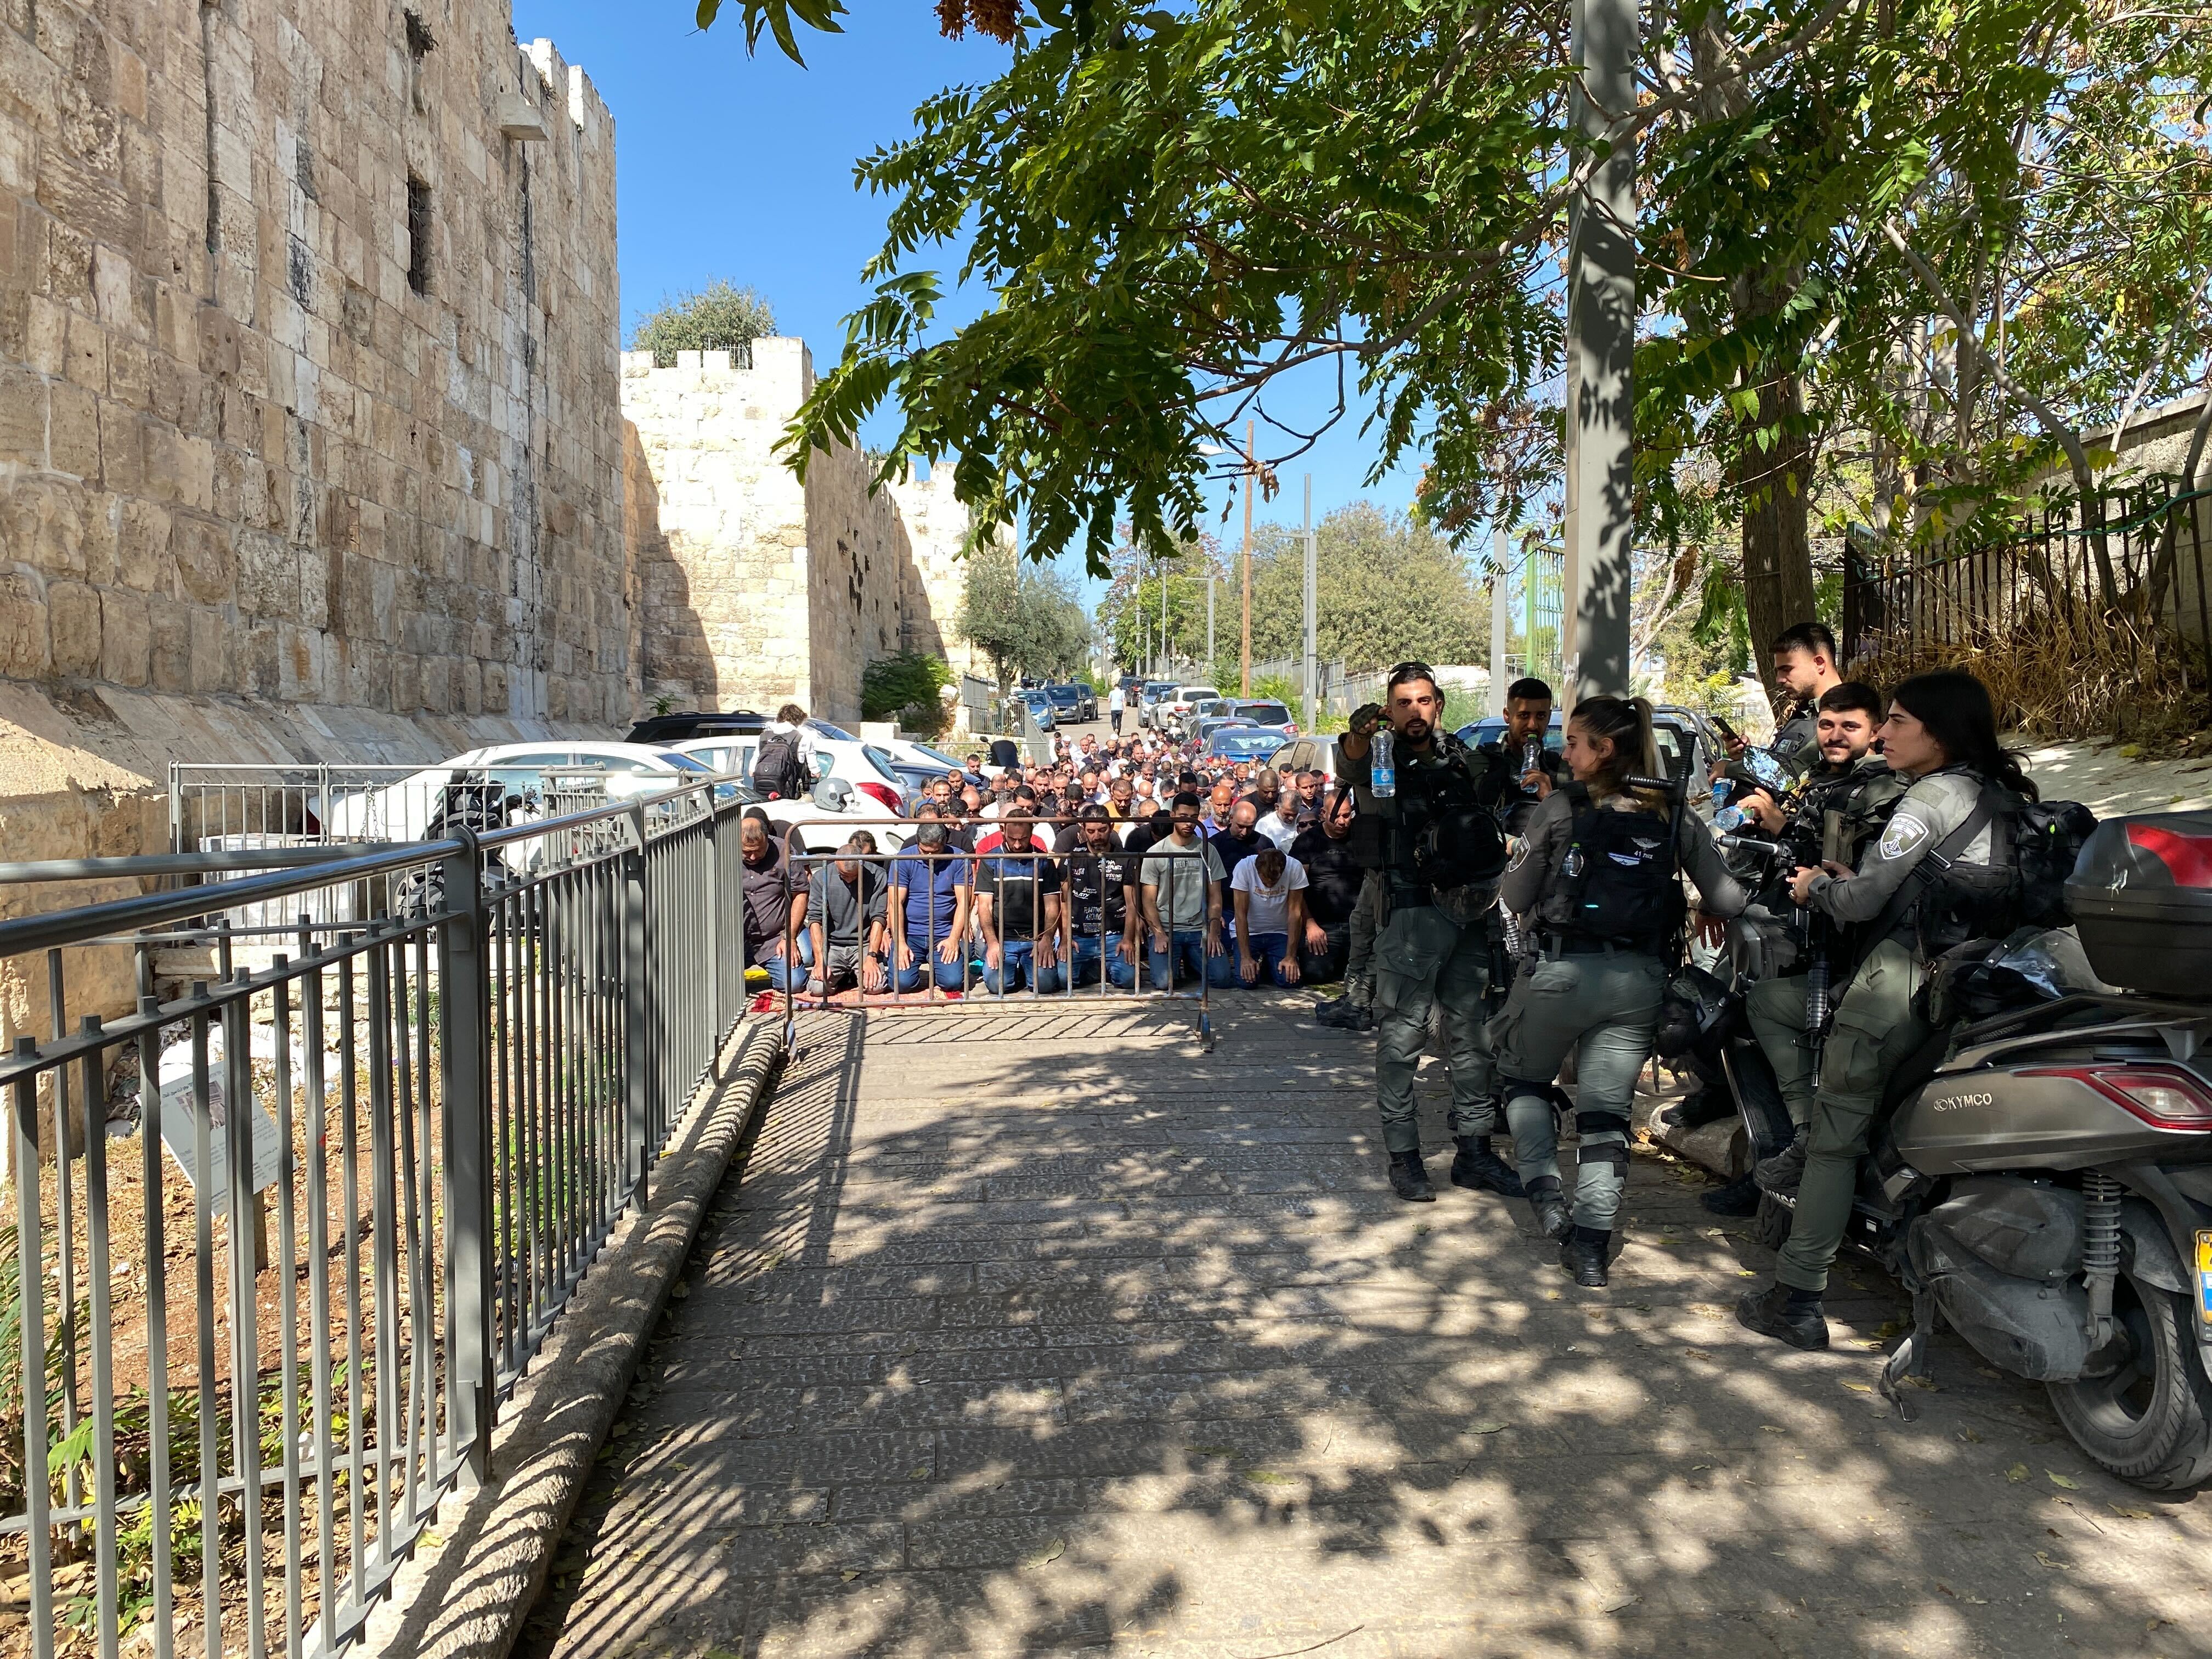 People praying outside the gates of the old city after not being allowed to enter.